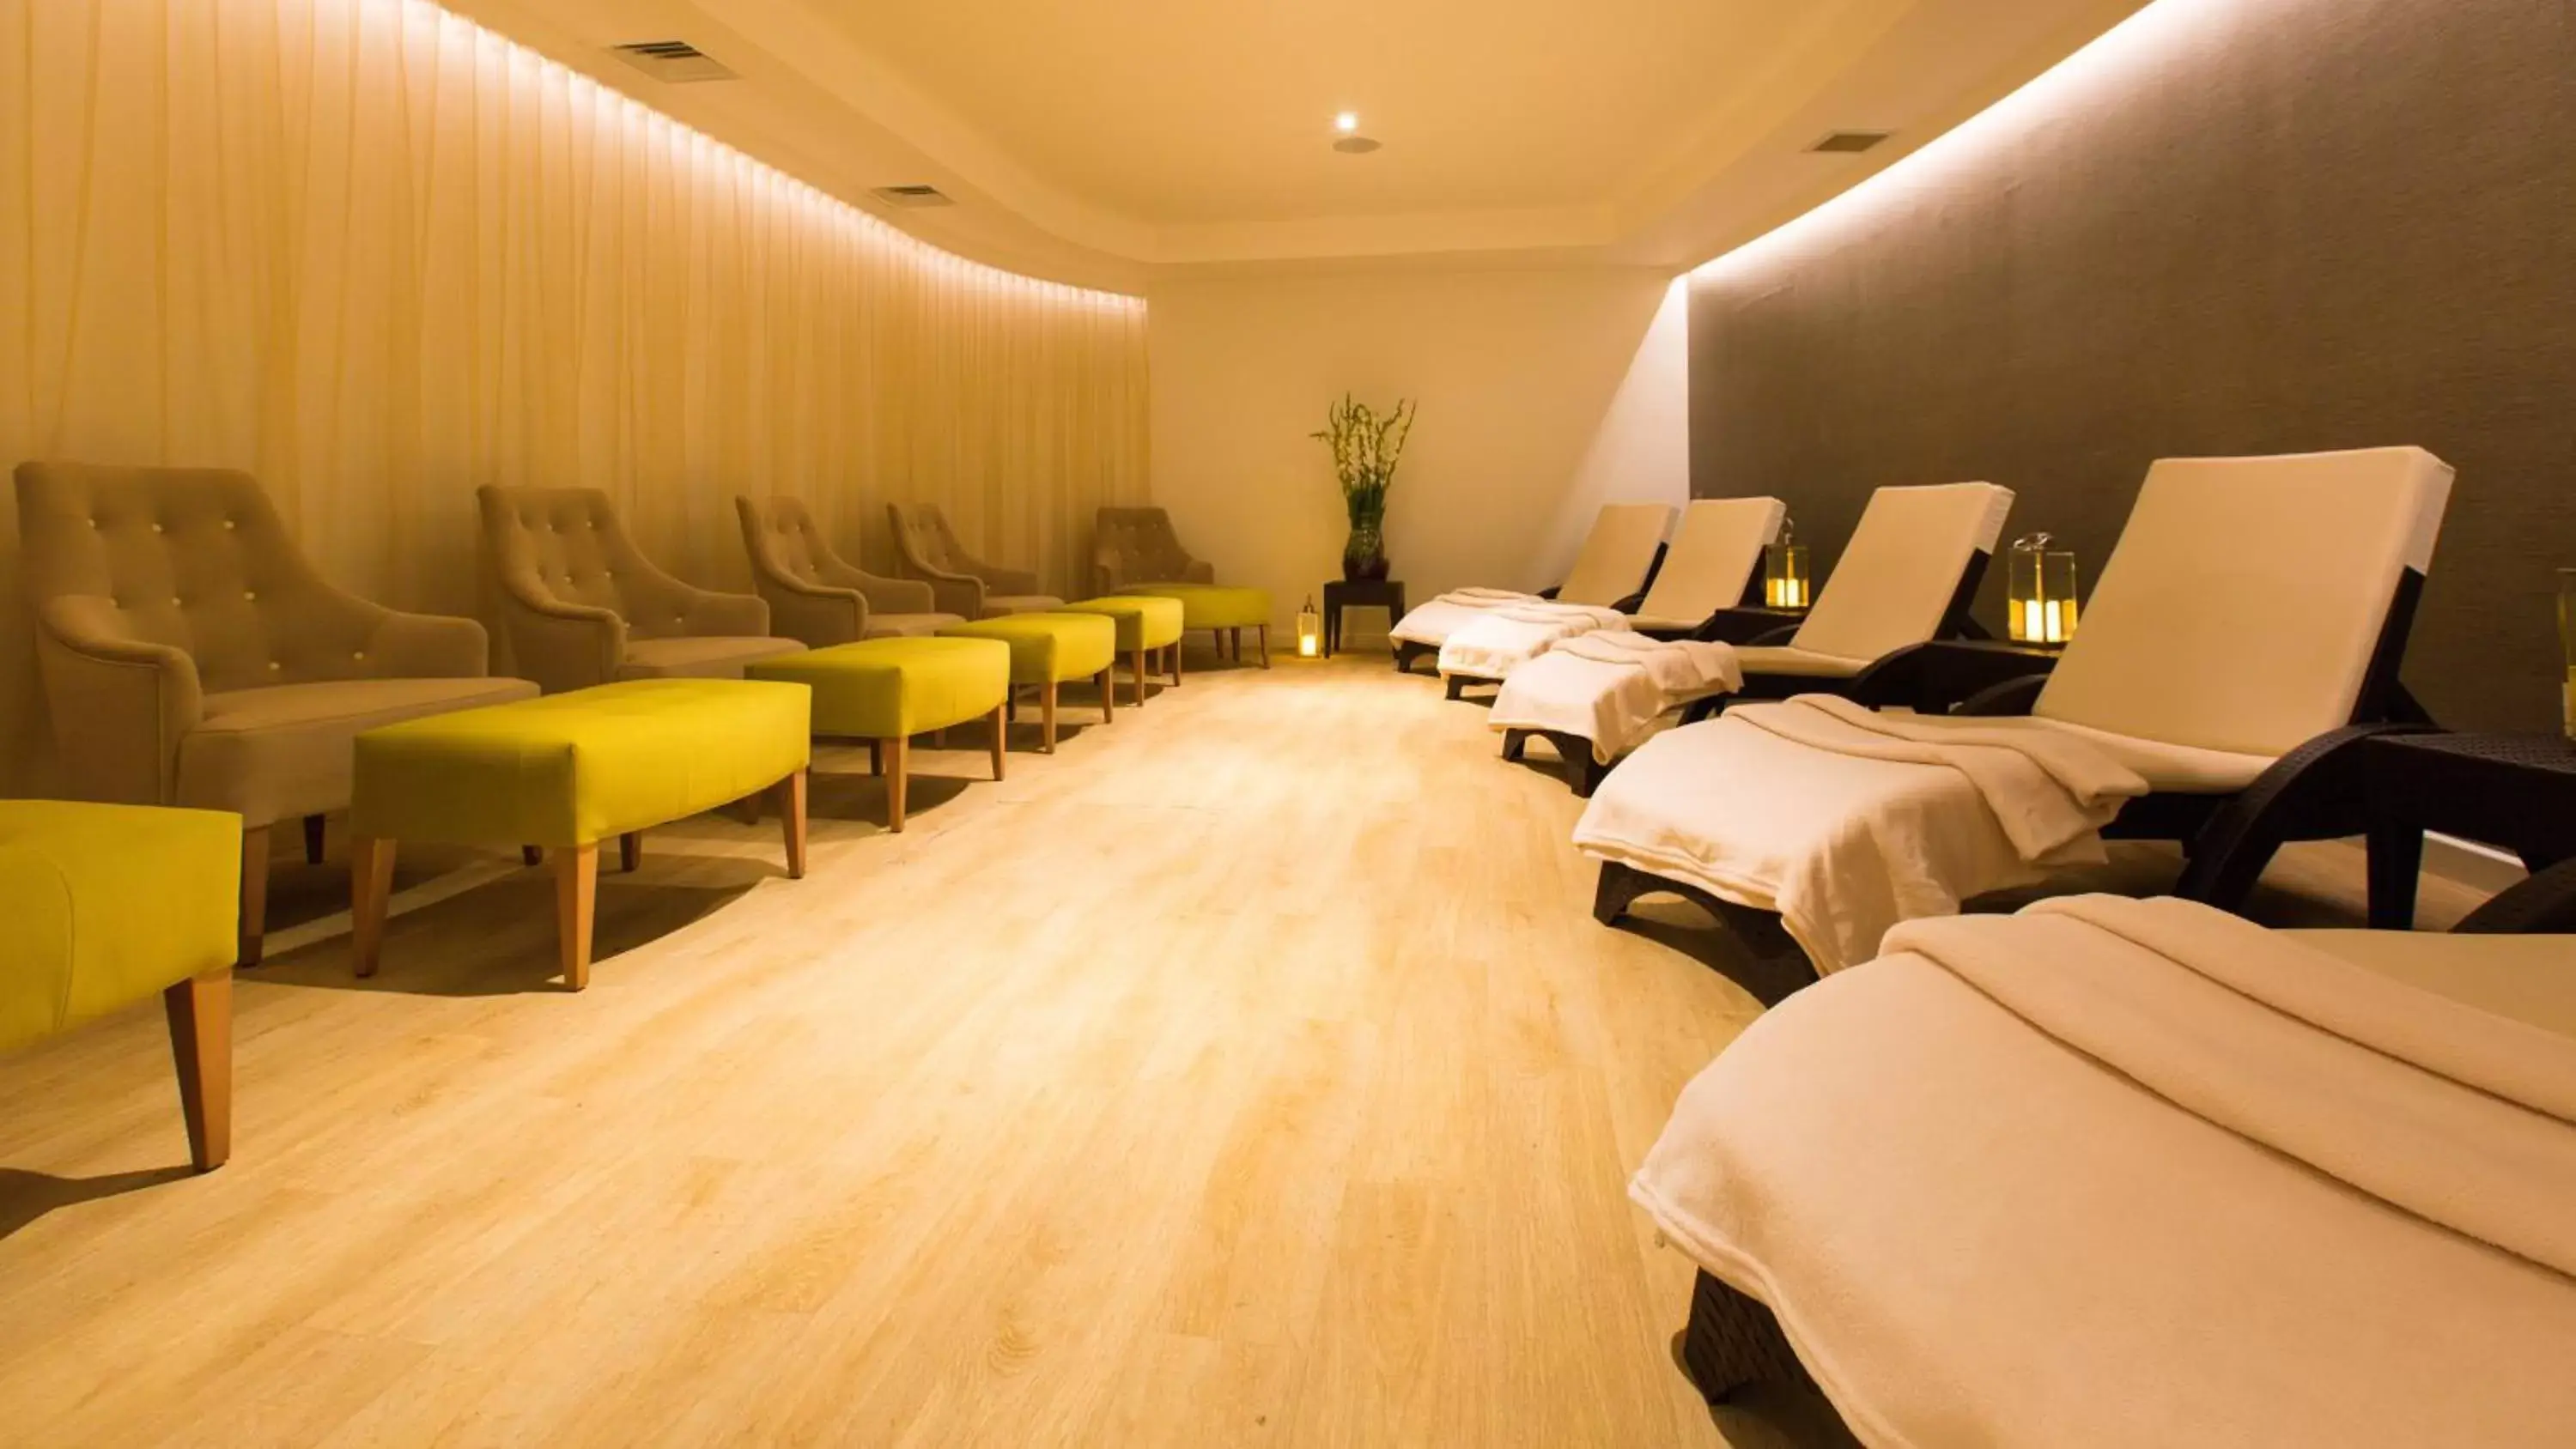 Spa and wellness centre/facilities in Belton Woods Hotel, Spa & Golf Resort